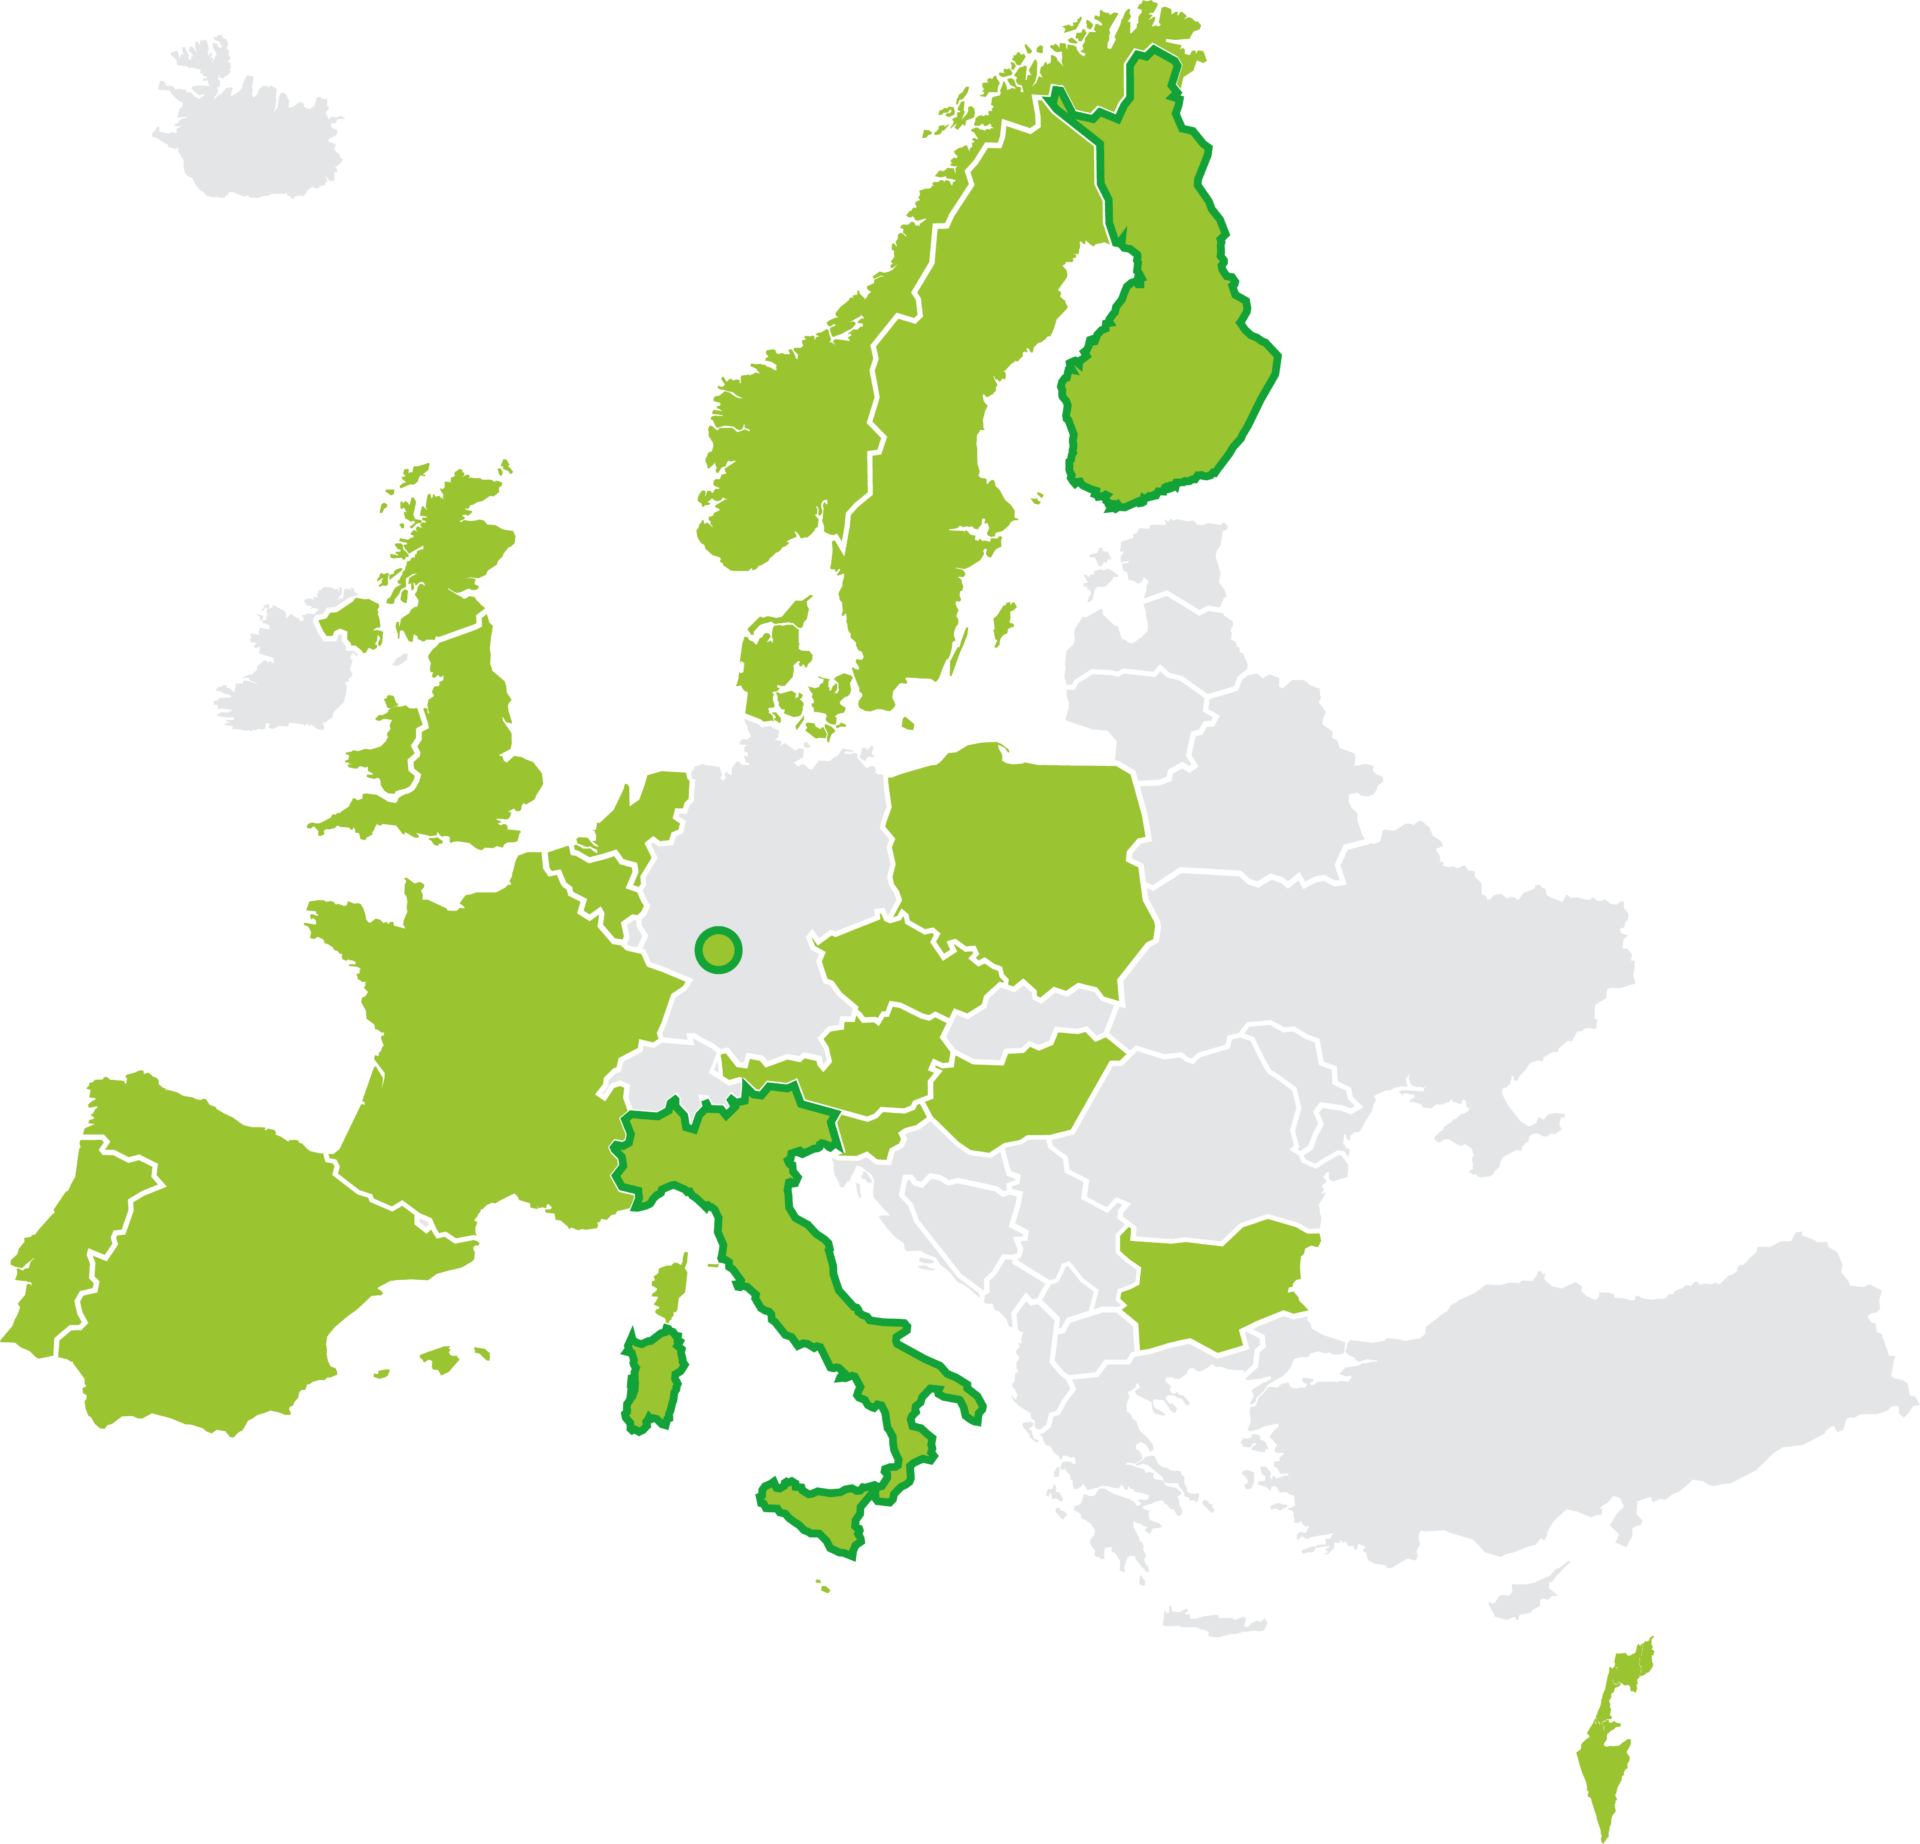 A map of the current Member States in Europe, and Israel, with the distinction of the countries where the Hub is hosted (Finland, Germany, Italy).